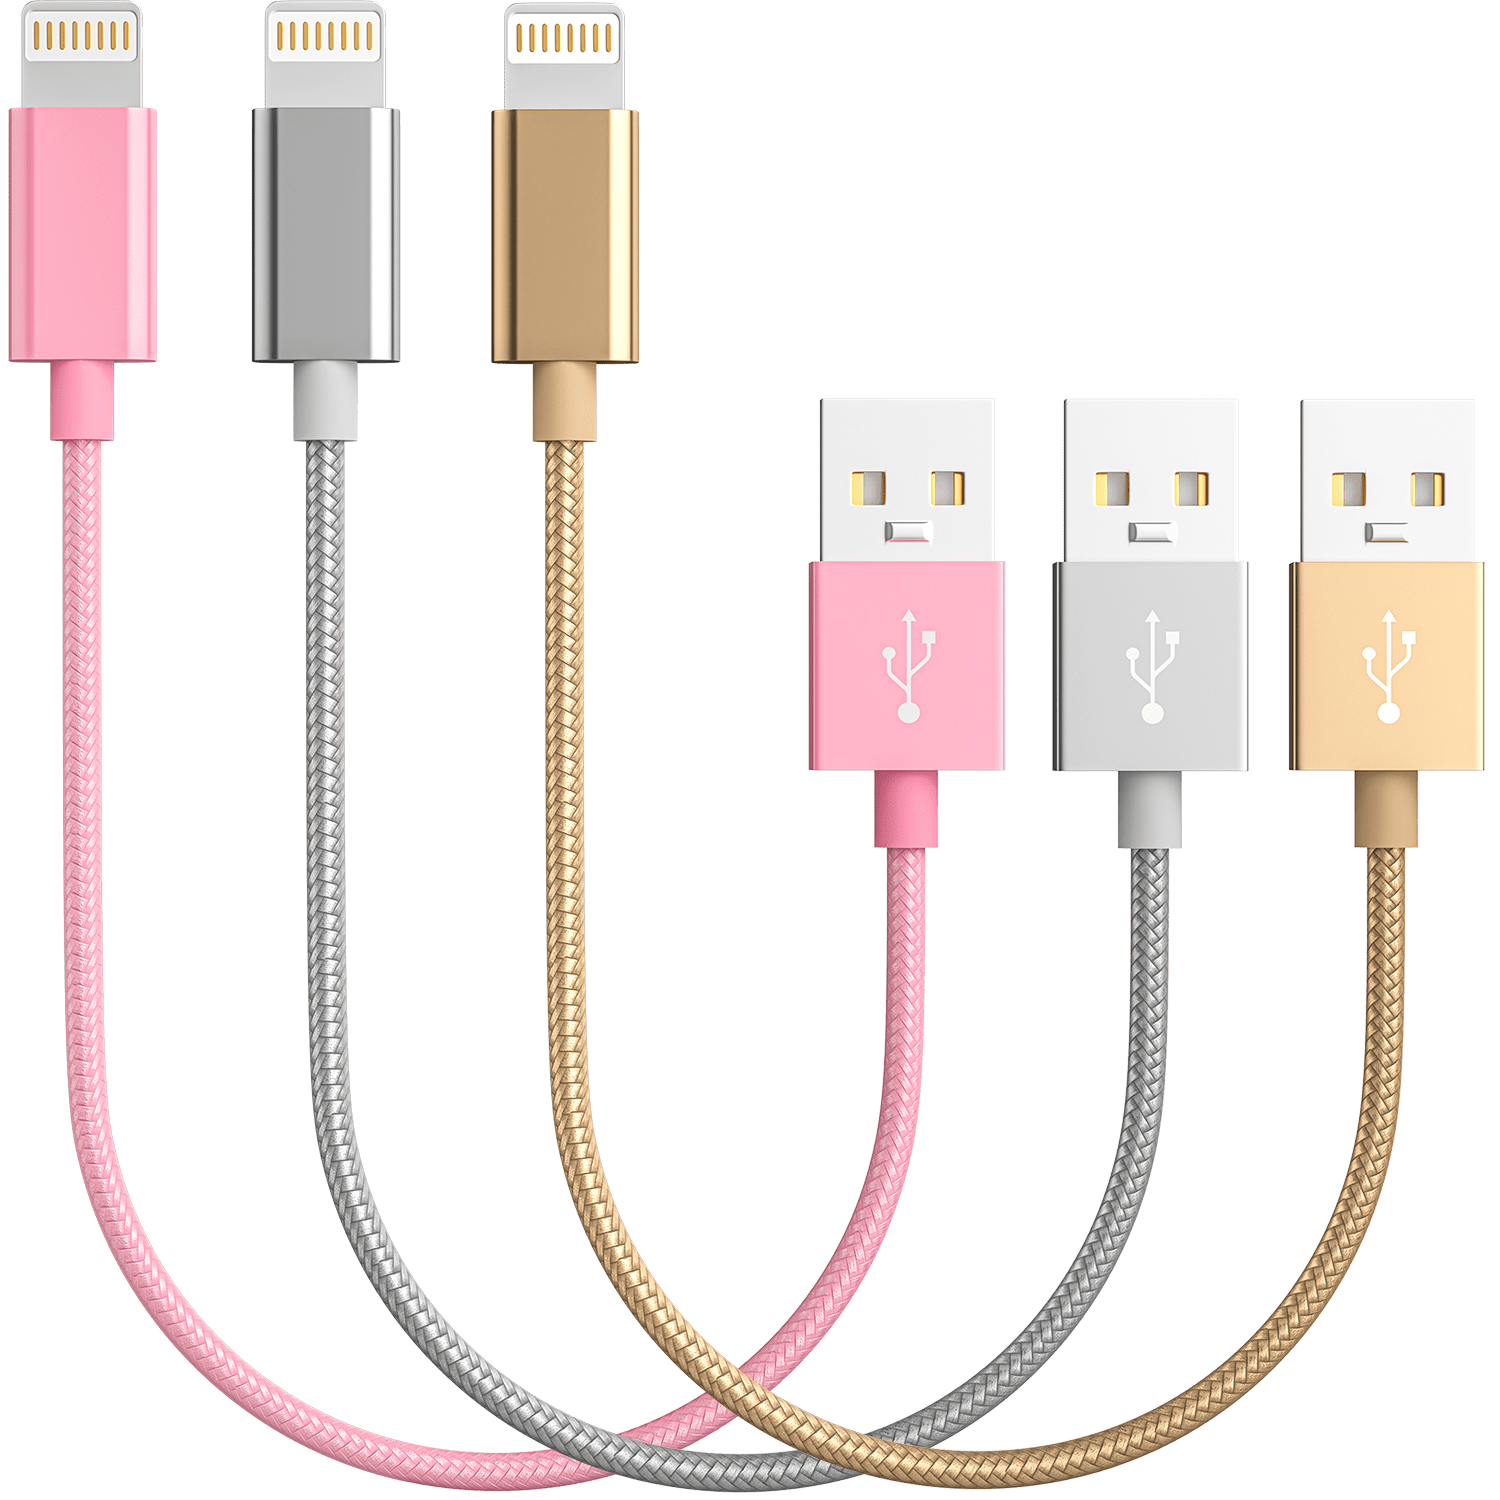 Can Be Charged and Data Transmission Synchronous Fast Charging Cable-Multicolored Hot Air Balloon Low-Angle Photography Round USB Data Cable Charging Cable